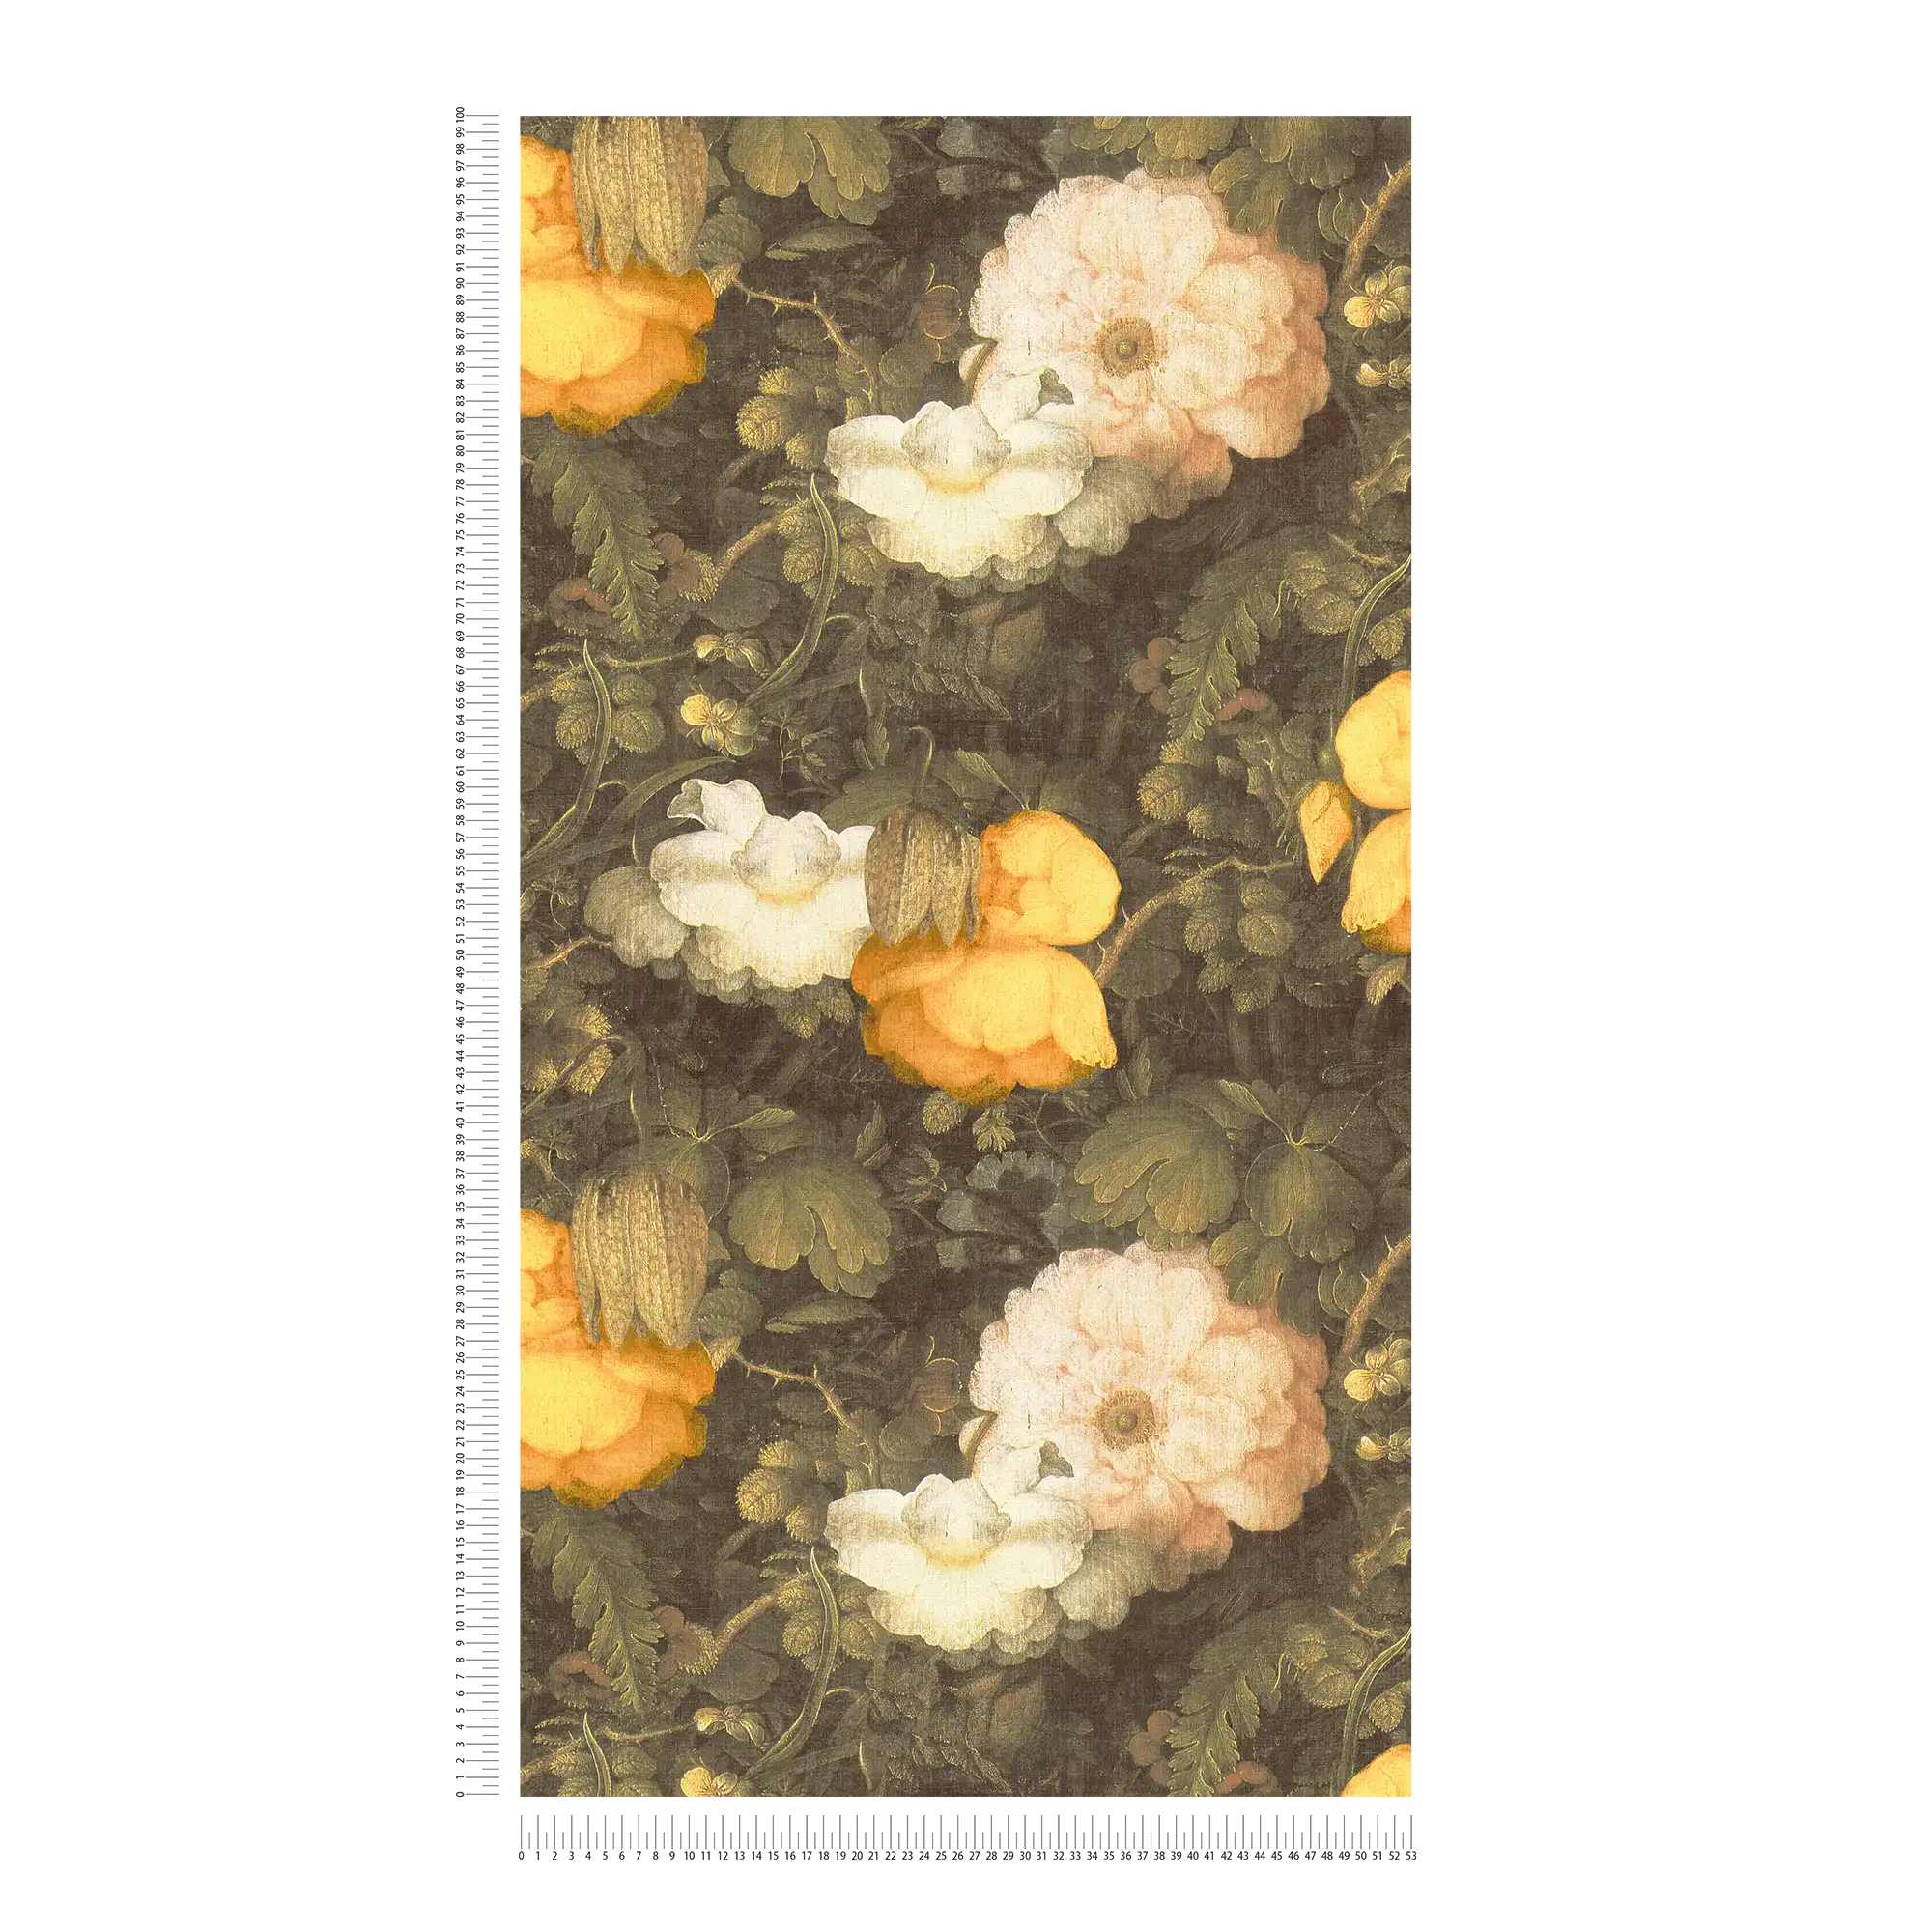             Painting style floral wallpaper, canvas look - green, yellow, cream
        